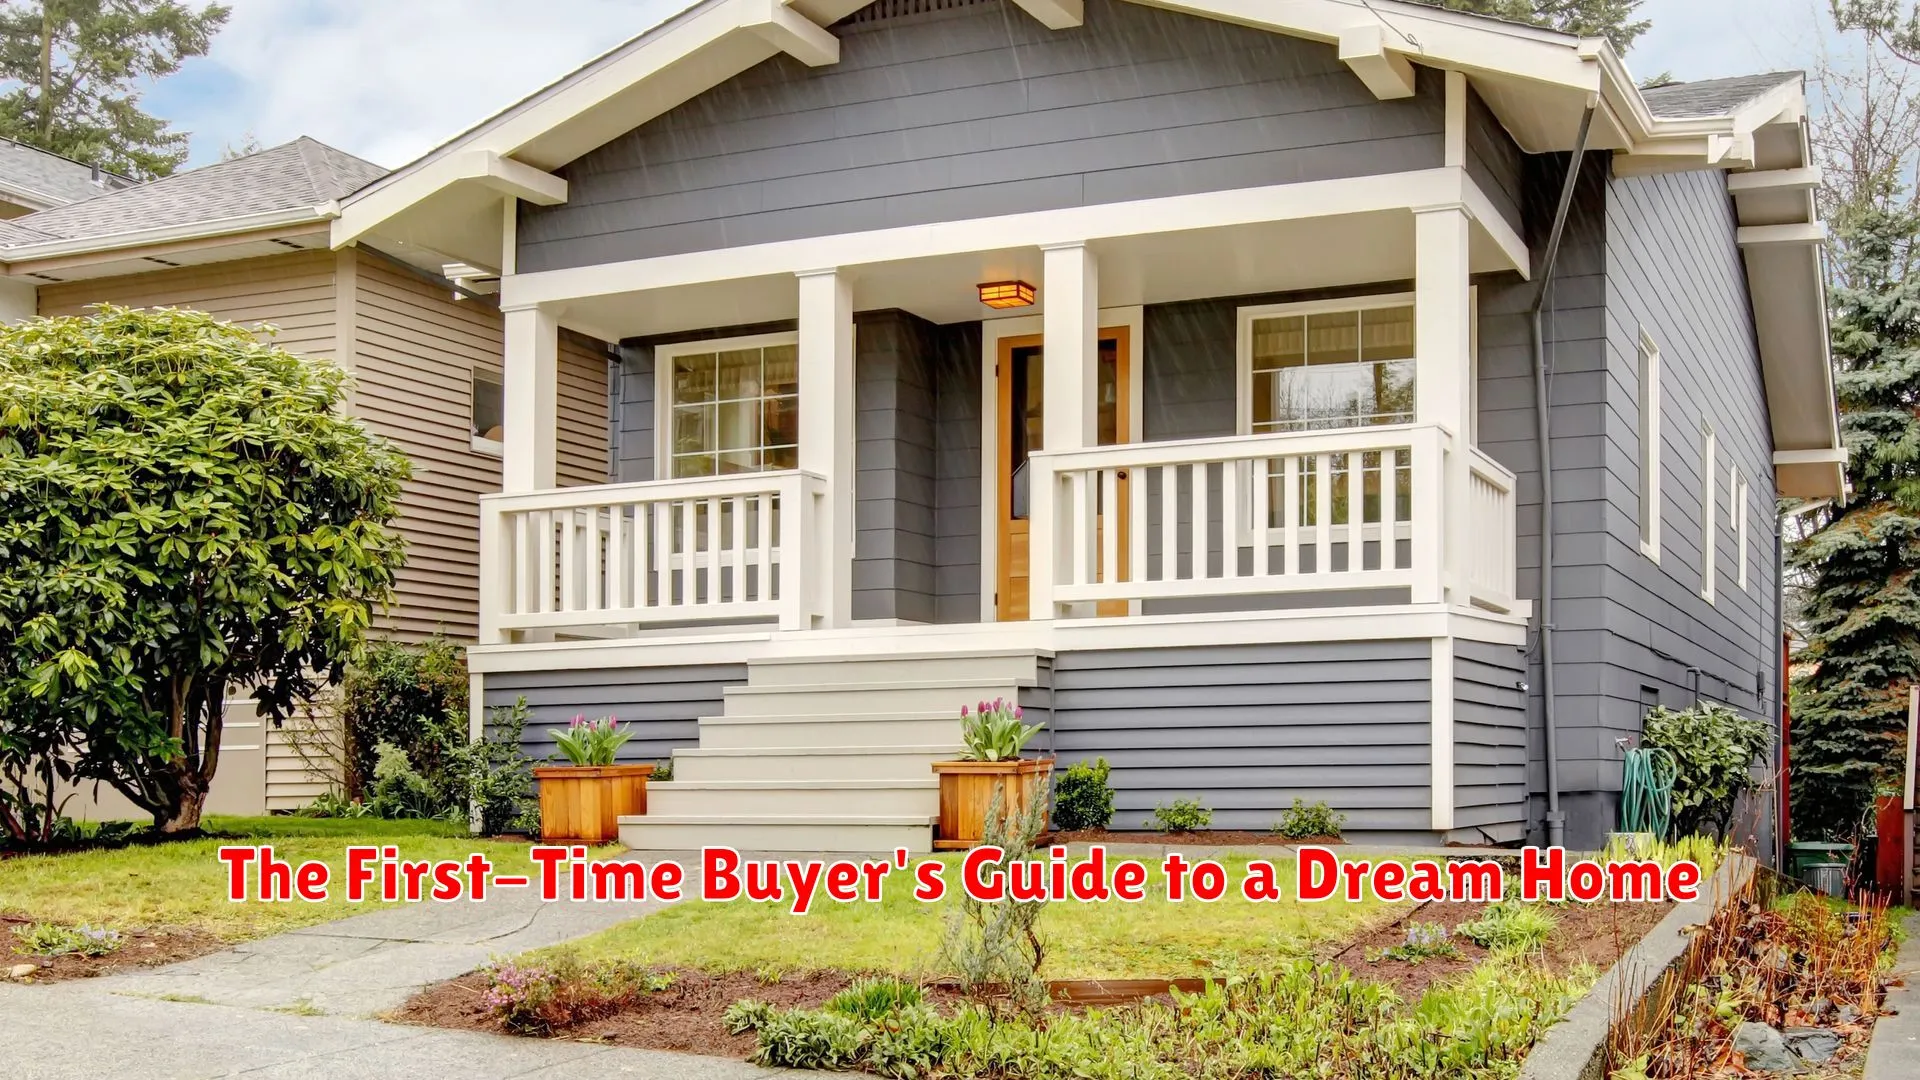 The First-Time Buyer's Guide to a Dream Home